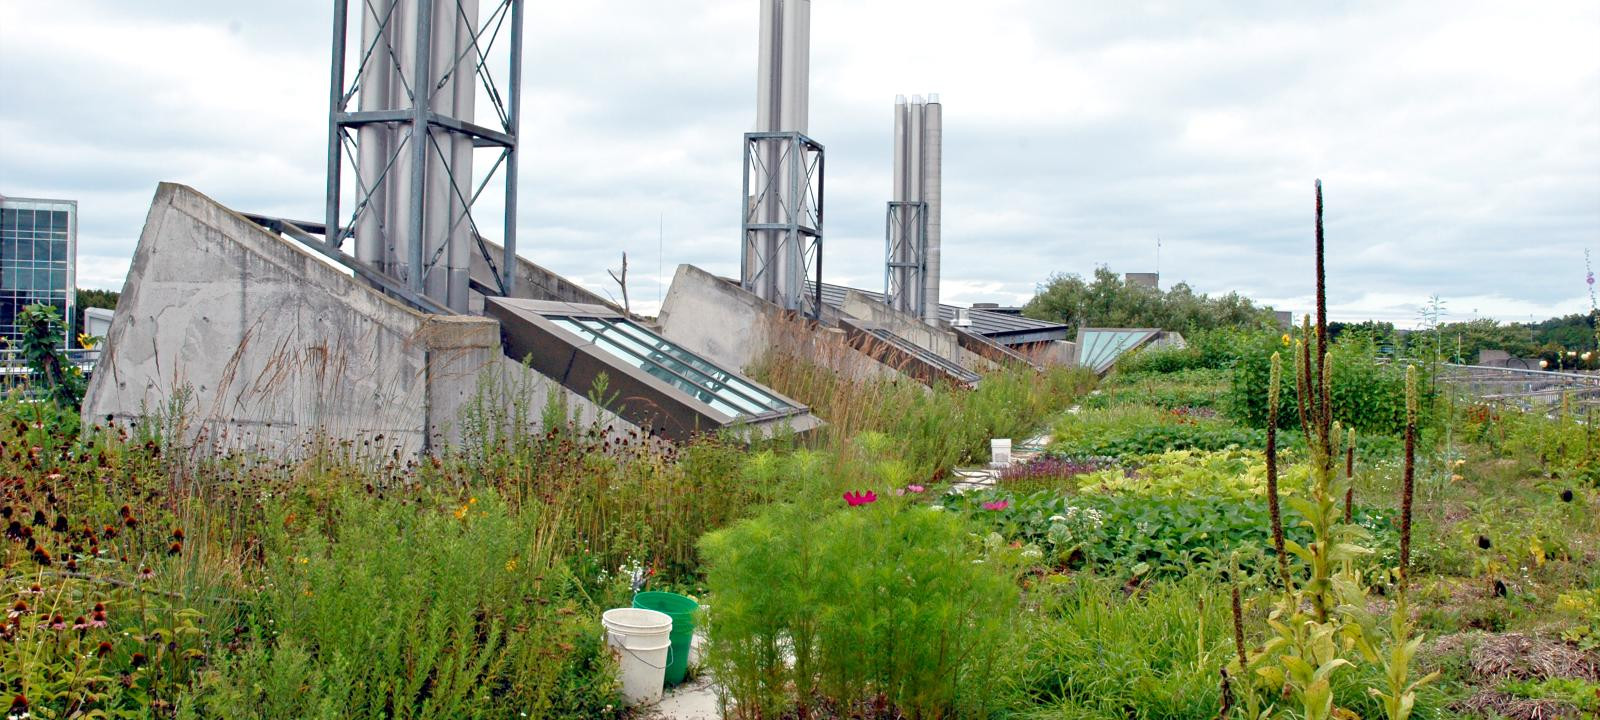 Intensive Green Roofs - Urban Rooftop Farming